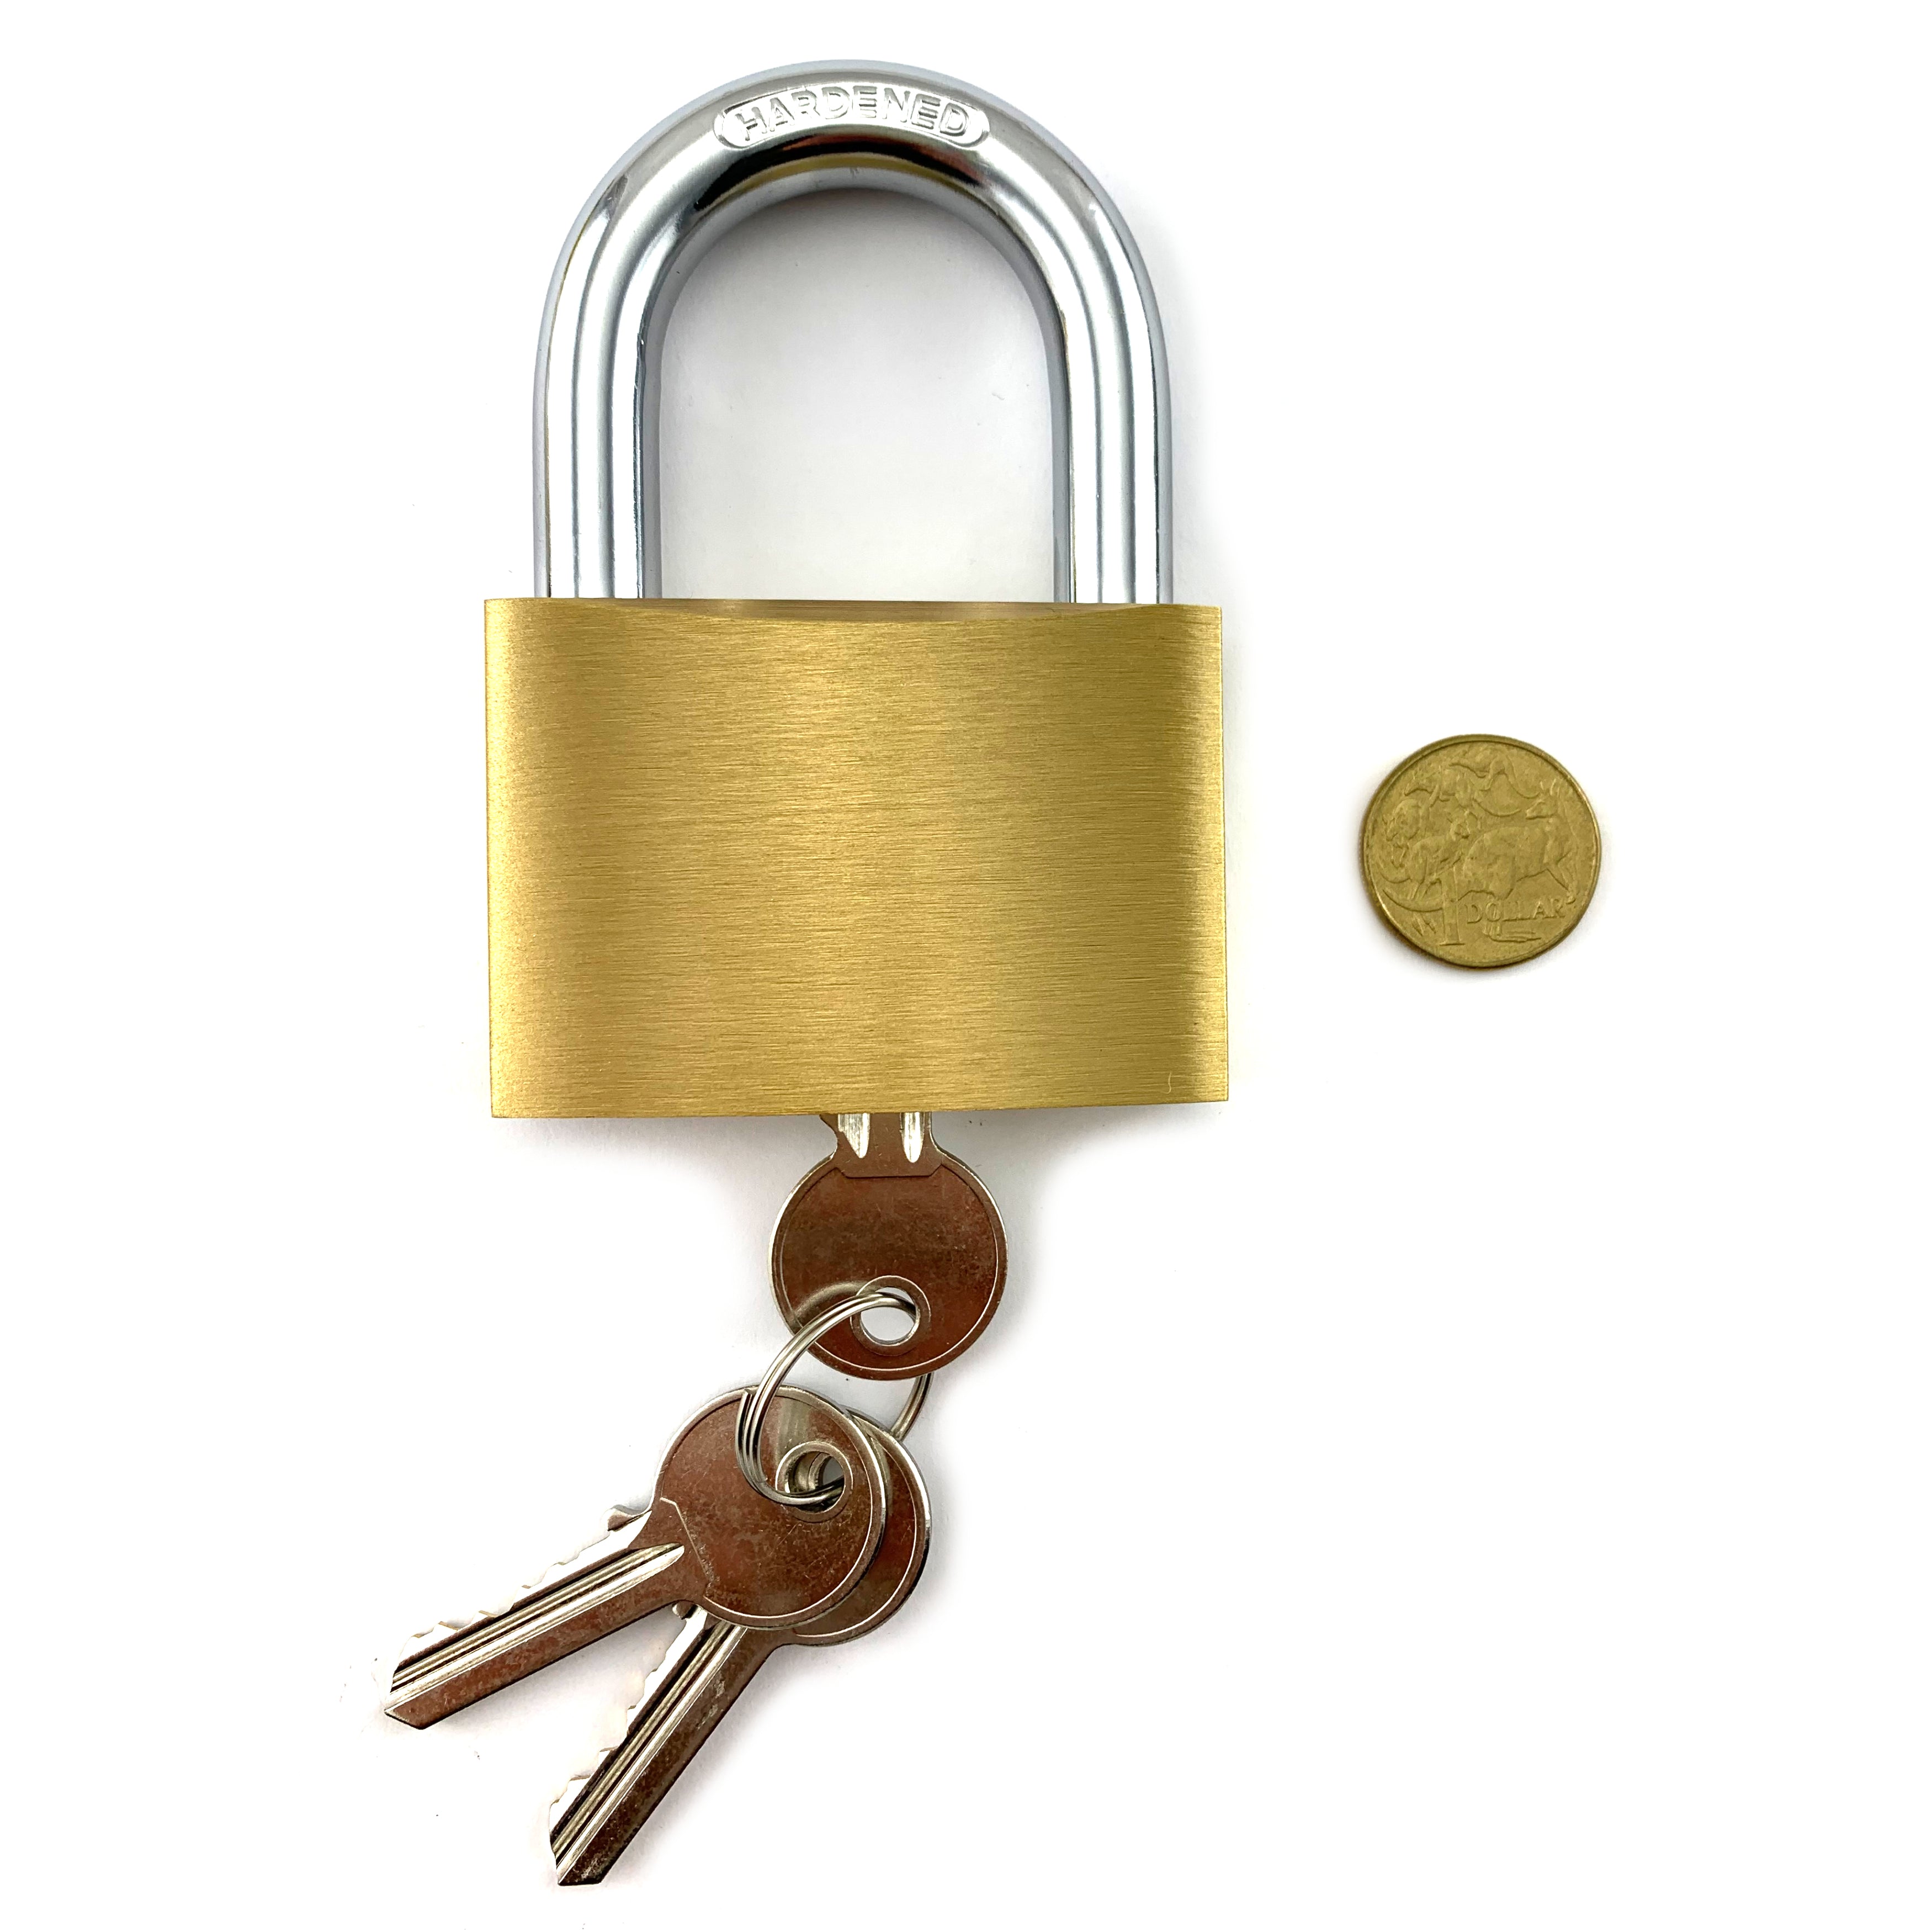 Brass Padlock Extra Large. Shackle size 12mm. Australia wide delivery